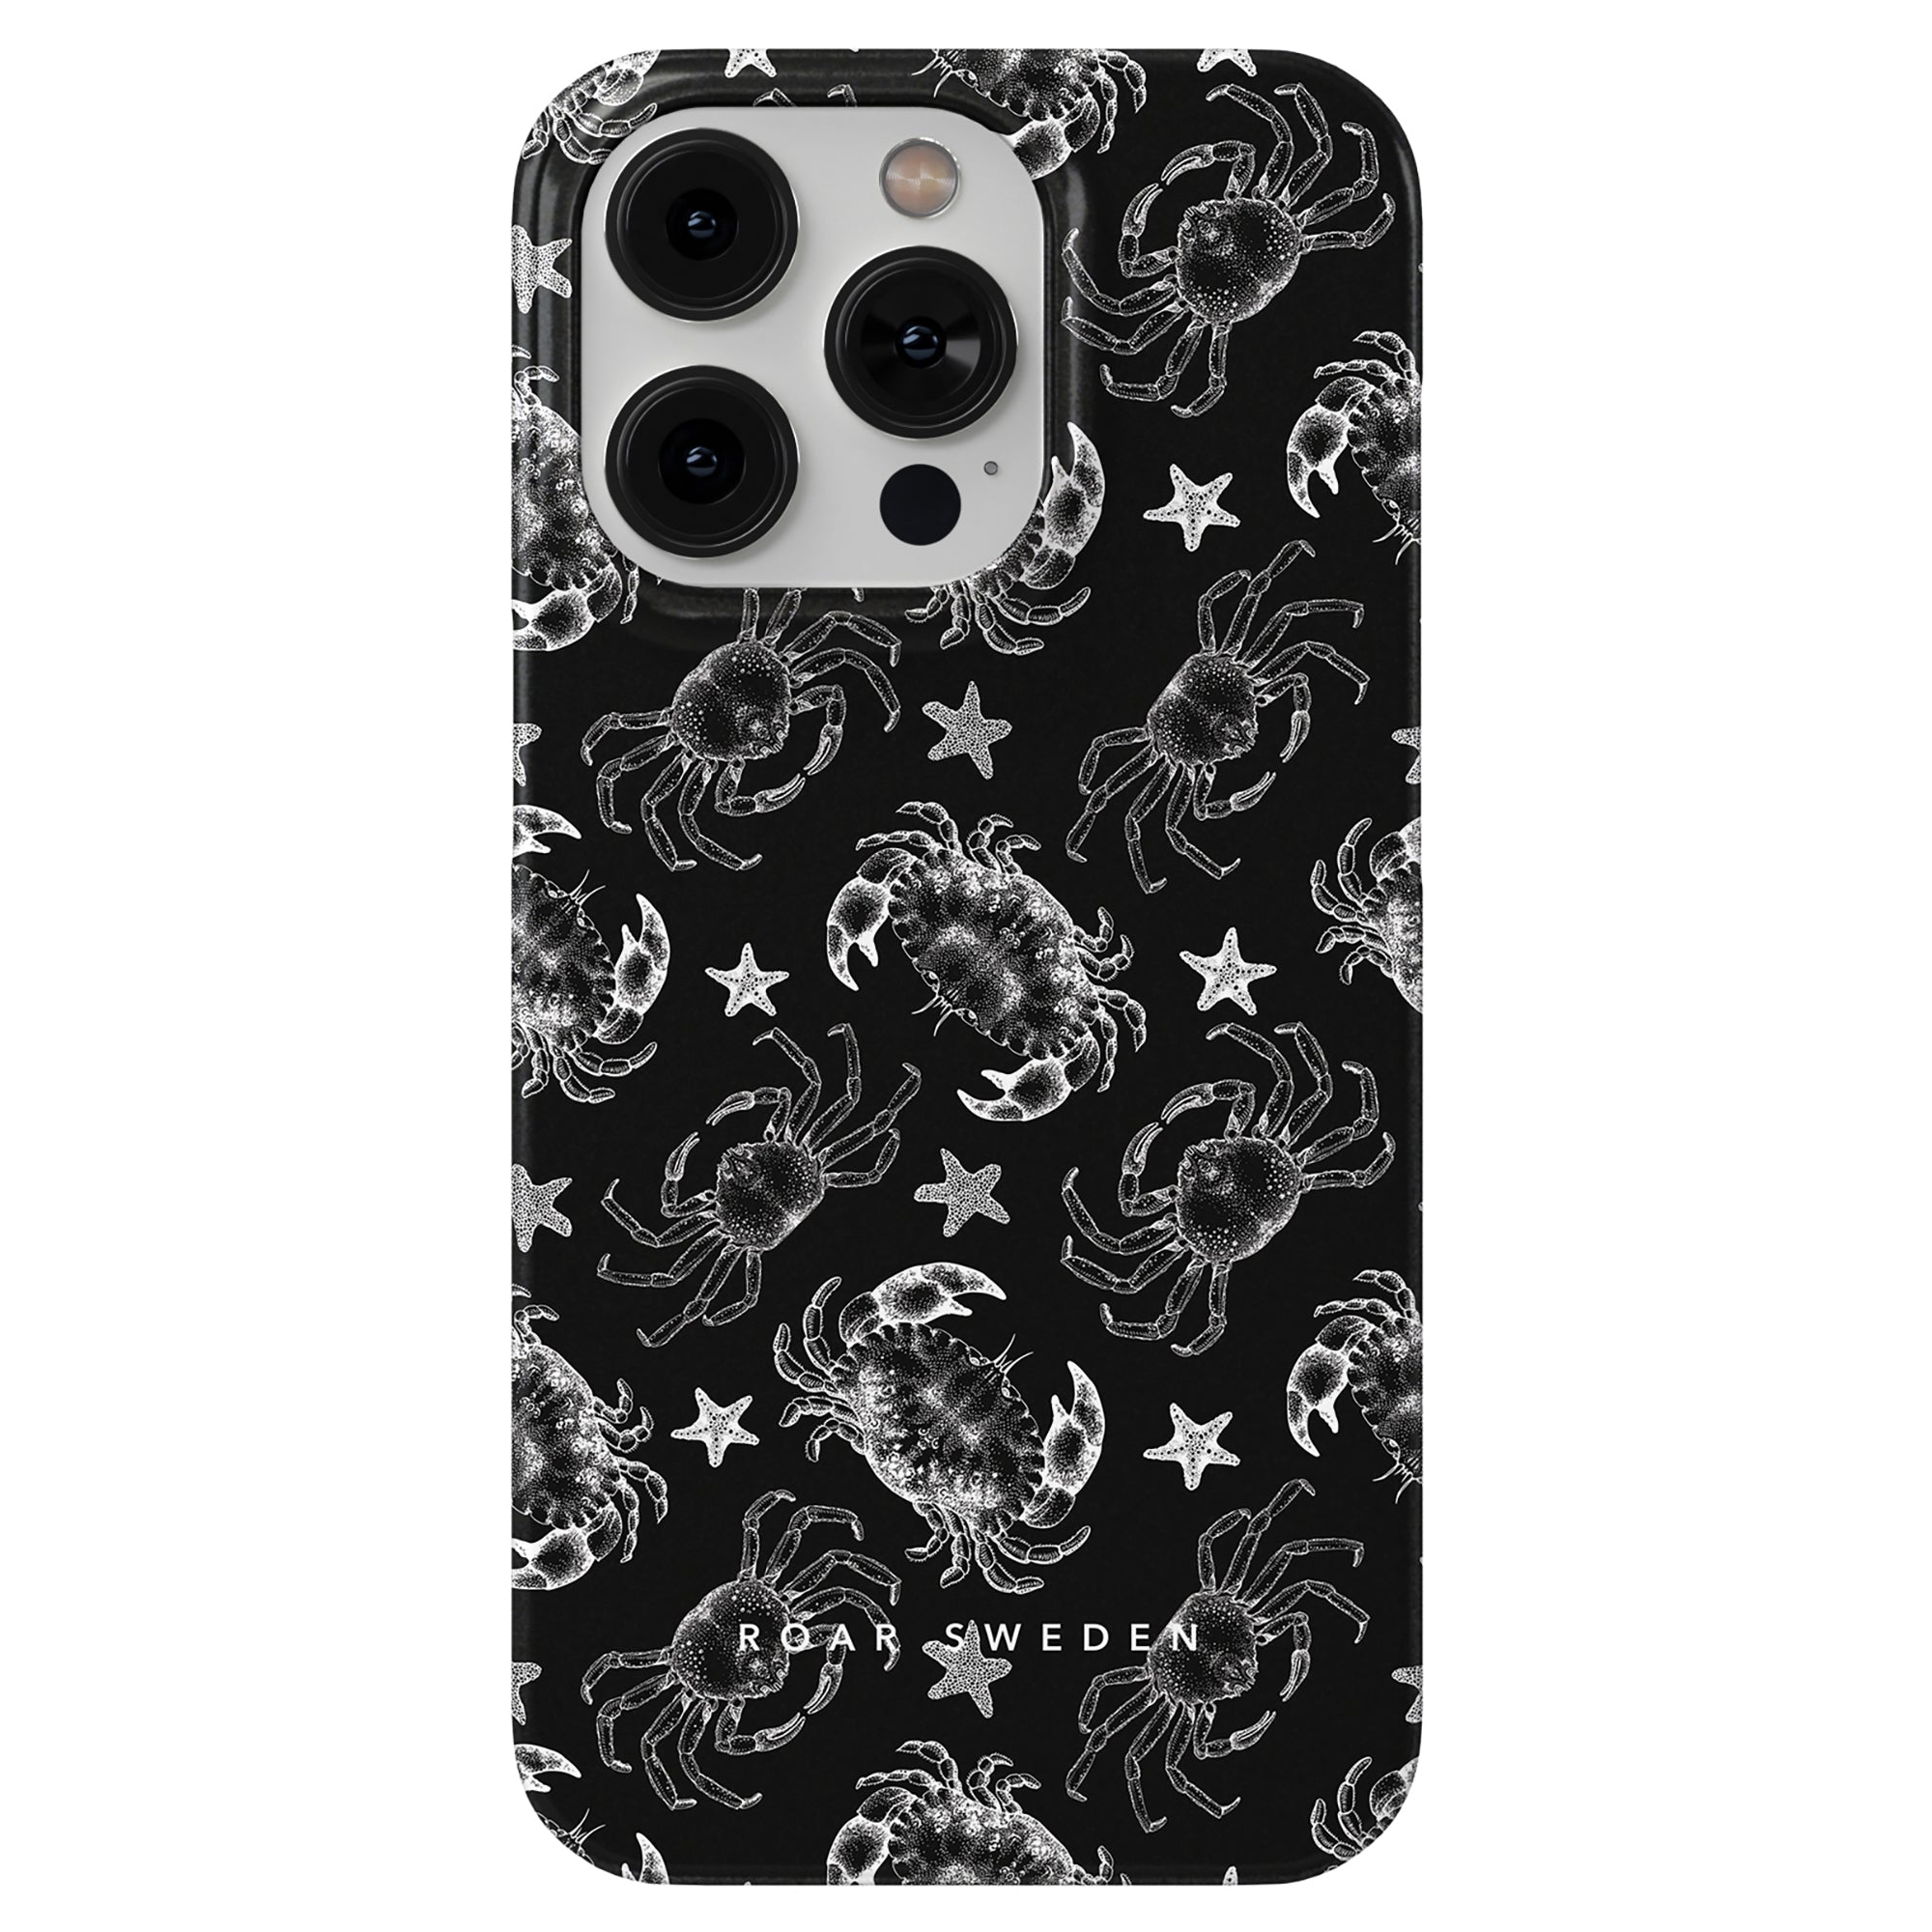 Smartphone case with black background and white illustrations of crabs and starfish, labeled "Black Crab - Slim case" at the bottom. Perfectly fitting into the Ocean Collection, this Black Crab Slim Case embodies true marin elegans.